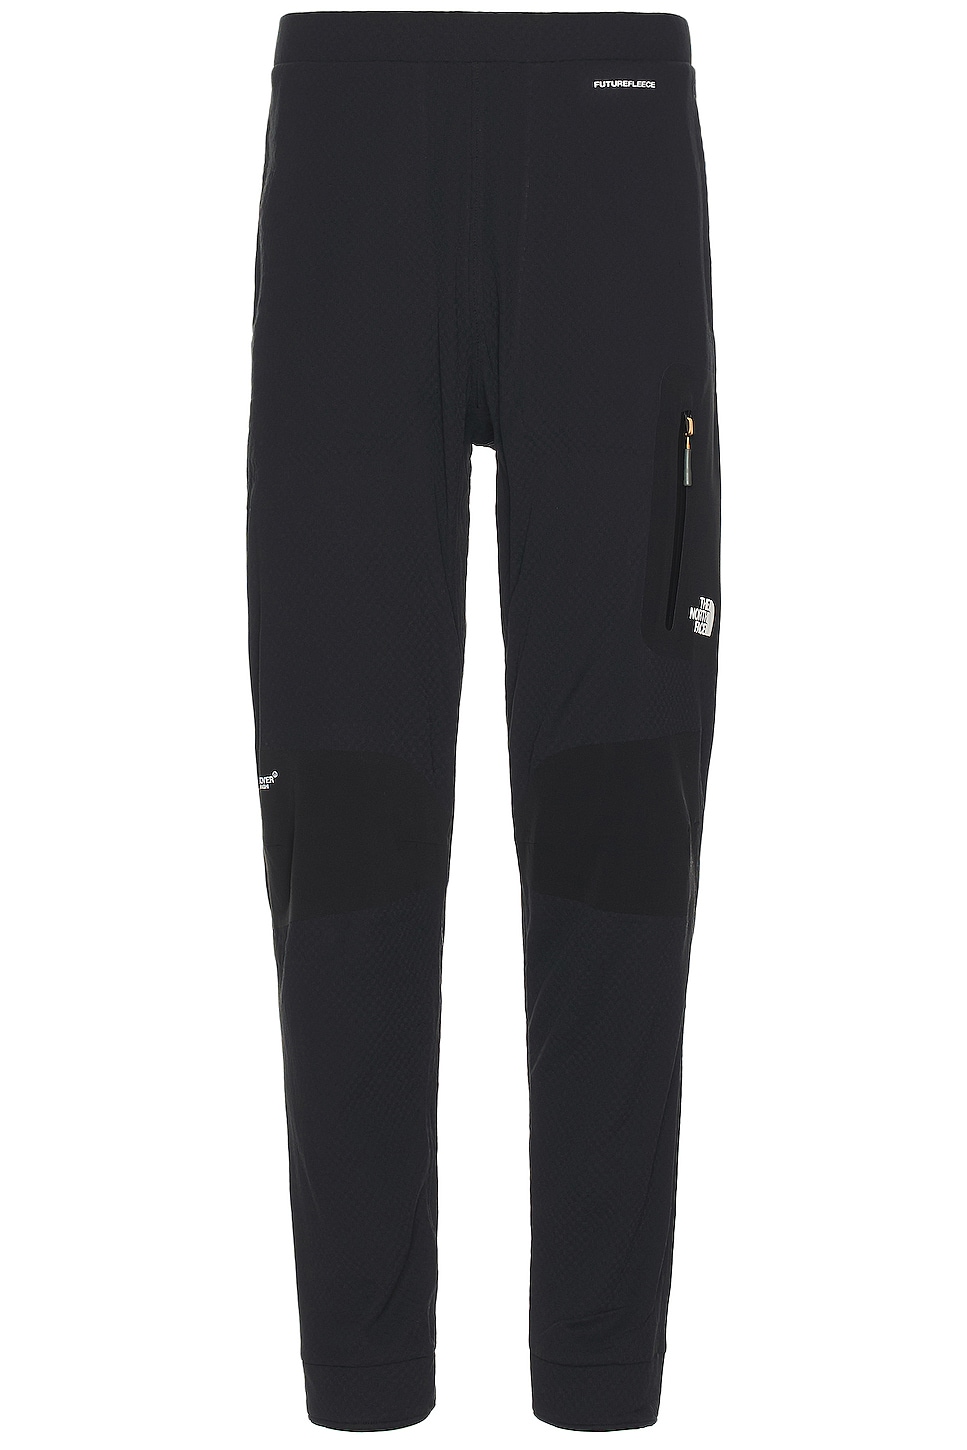 Image 1 of The North Face X Project U Futurefleece Pants in Tnf Black